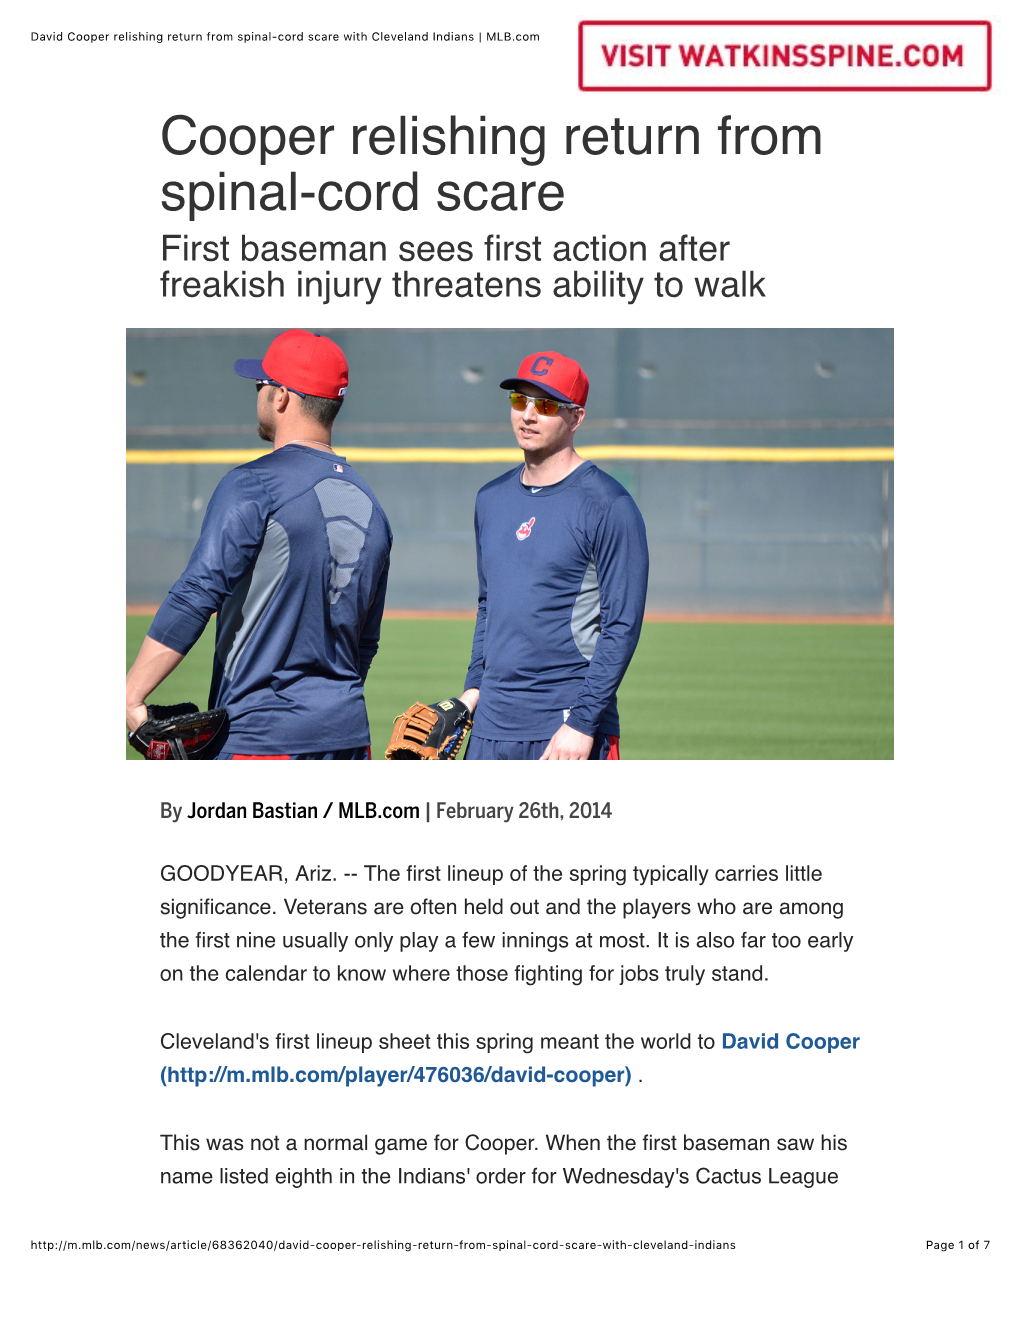 David Cooper Relishing Return from Spinal-Cord Scare with Cleveland Indians | MLB.Com 3/5/16, 5:31 PM